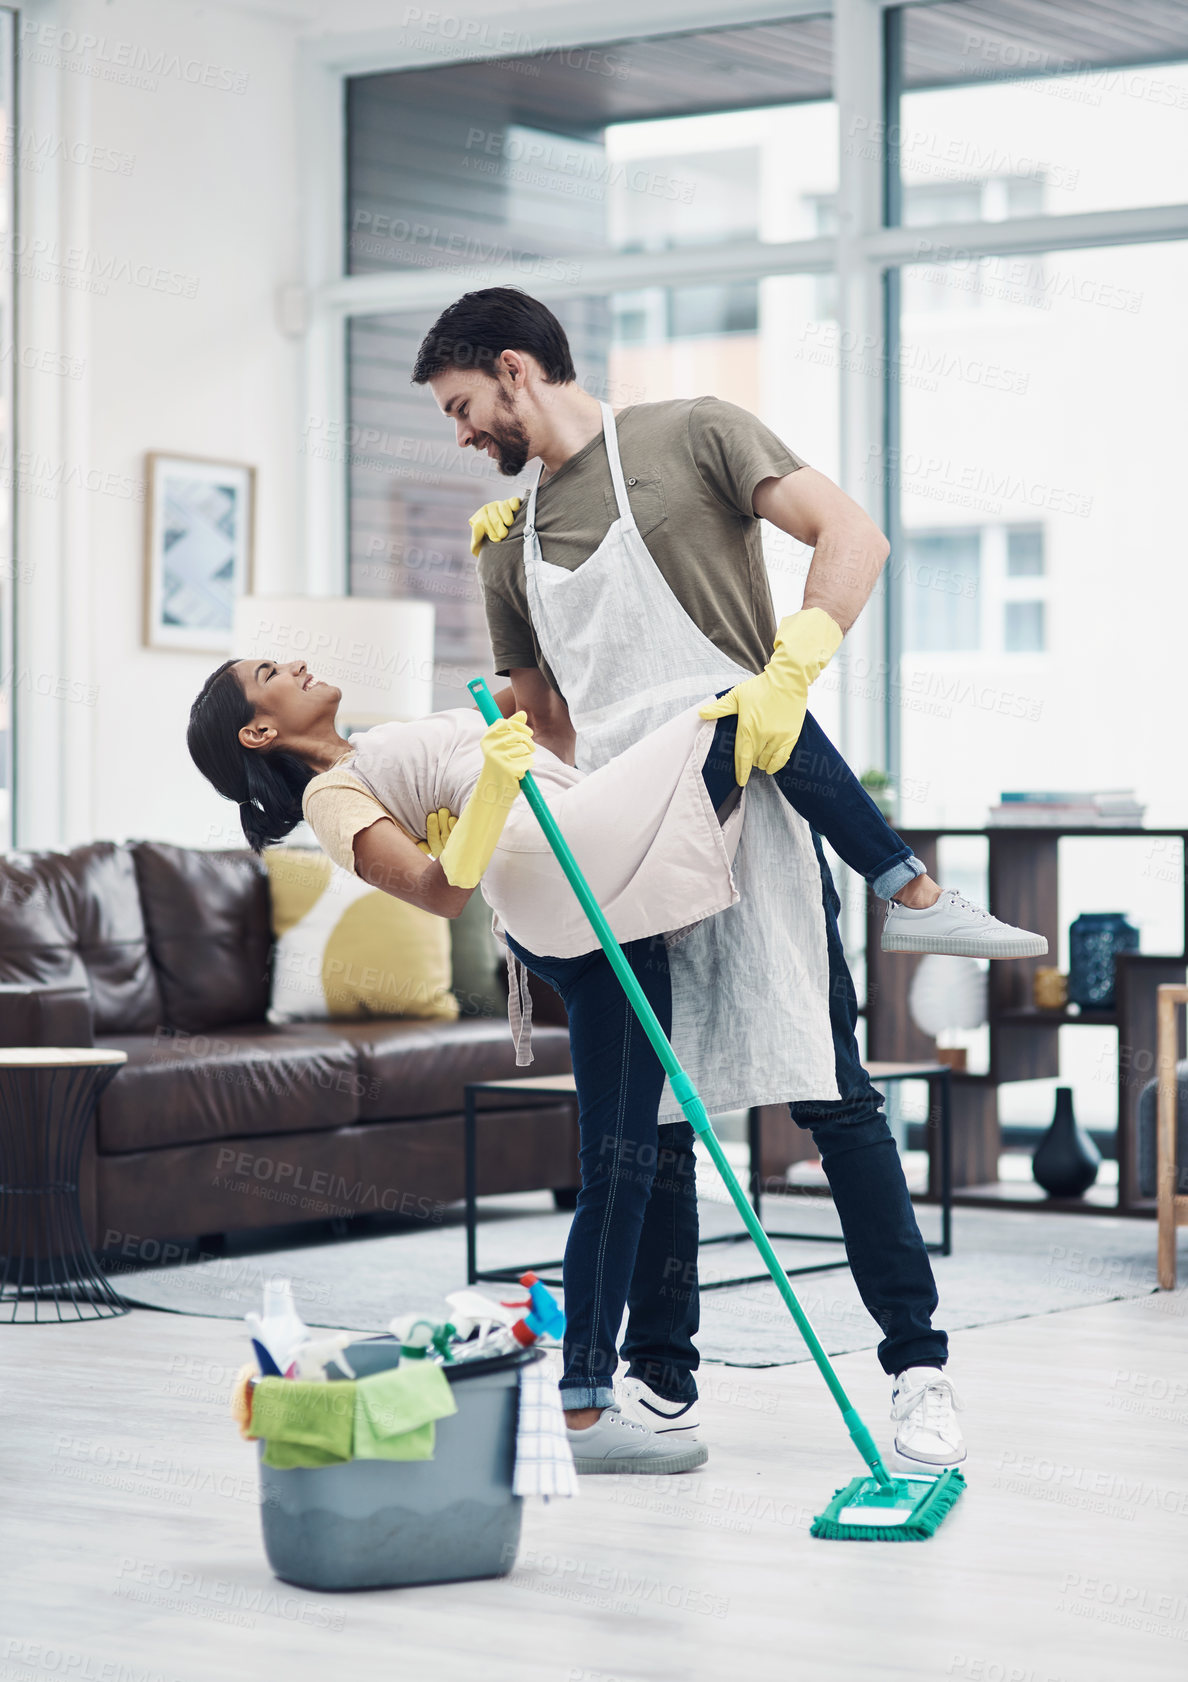 Buy stock photo Shot of a happy young couple dancing while mopping the floor at home